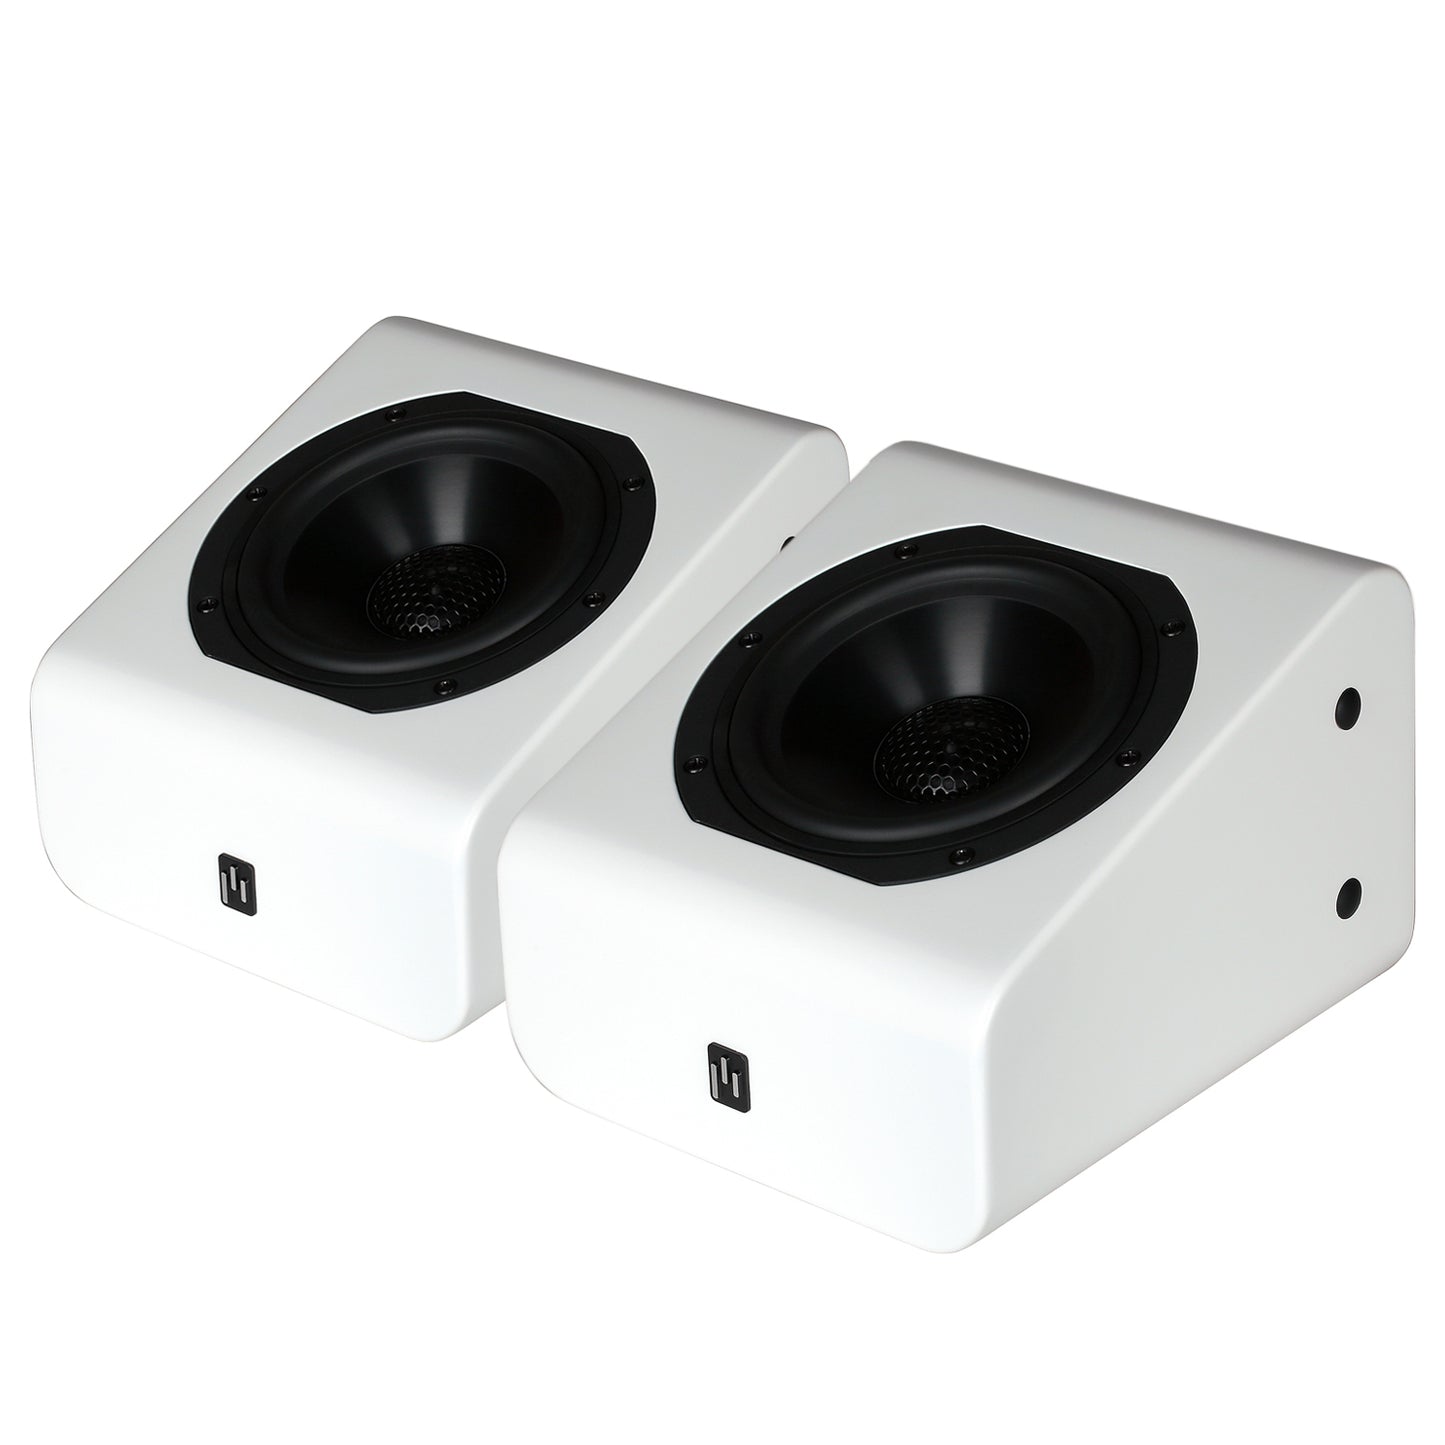 Aperion-A5-Atmos-5.25"-Immersive-Reflective/Height-Module-Speaker-White-Pair-aperionaudio